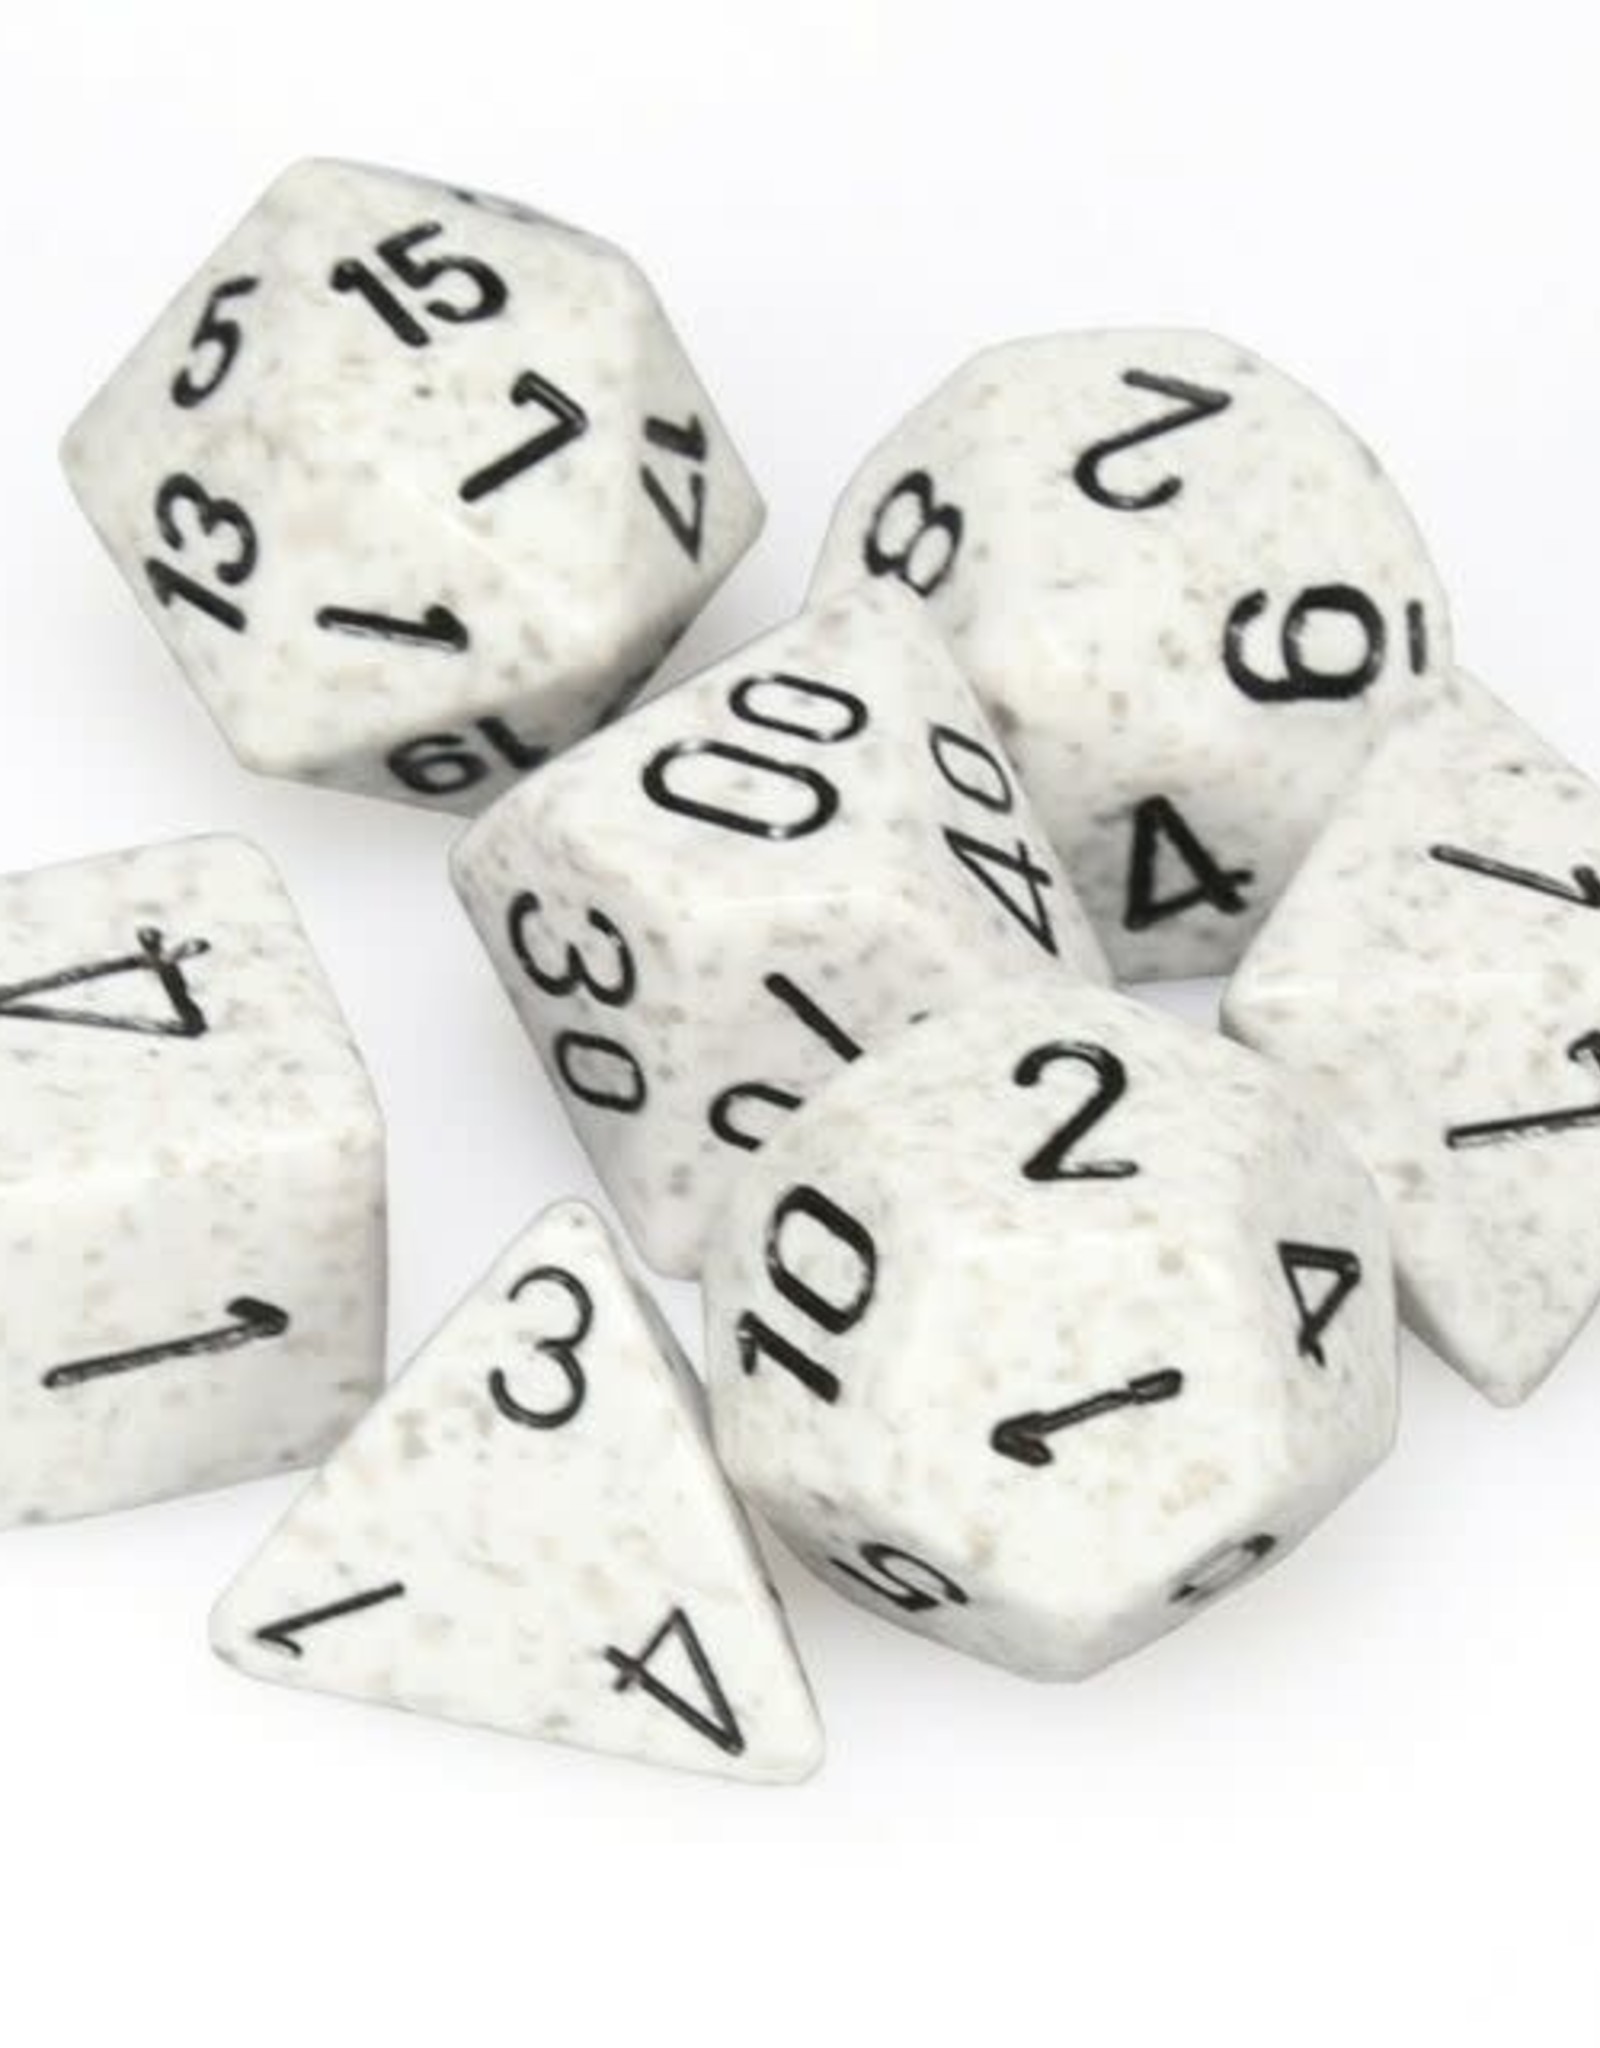 Chessex Dice - 7pc Speckled Arctic Camo Polyhedral